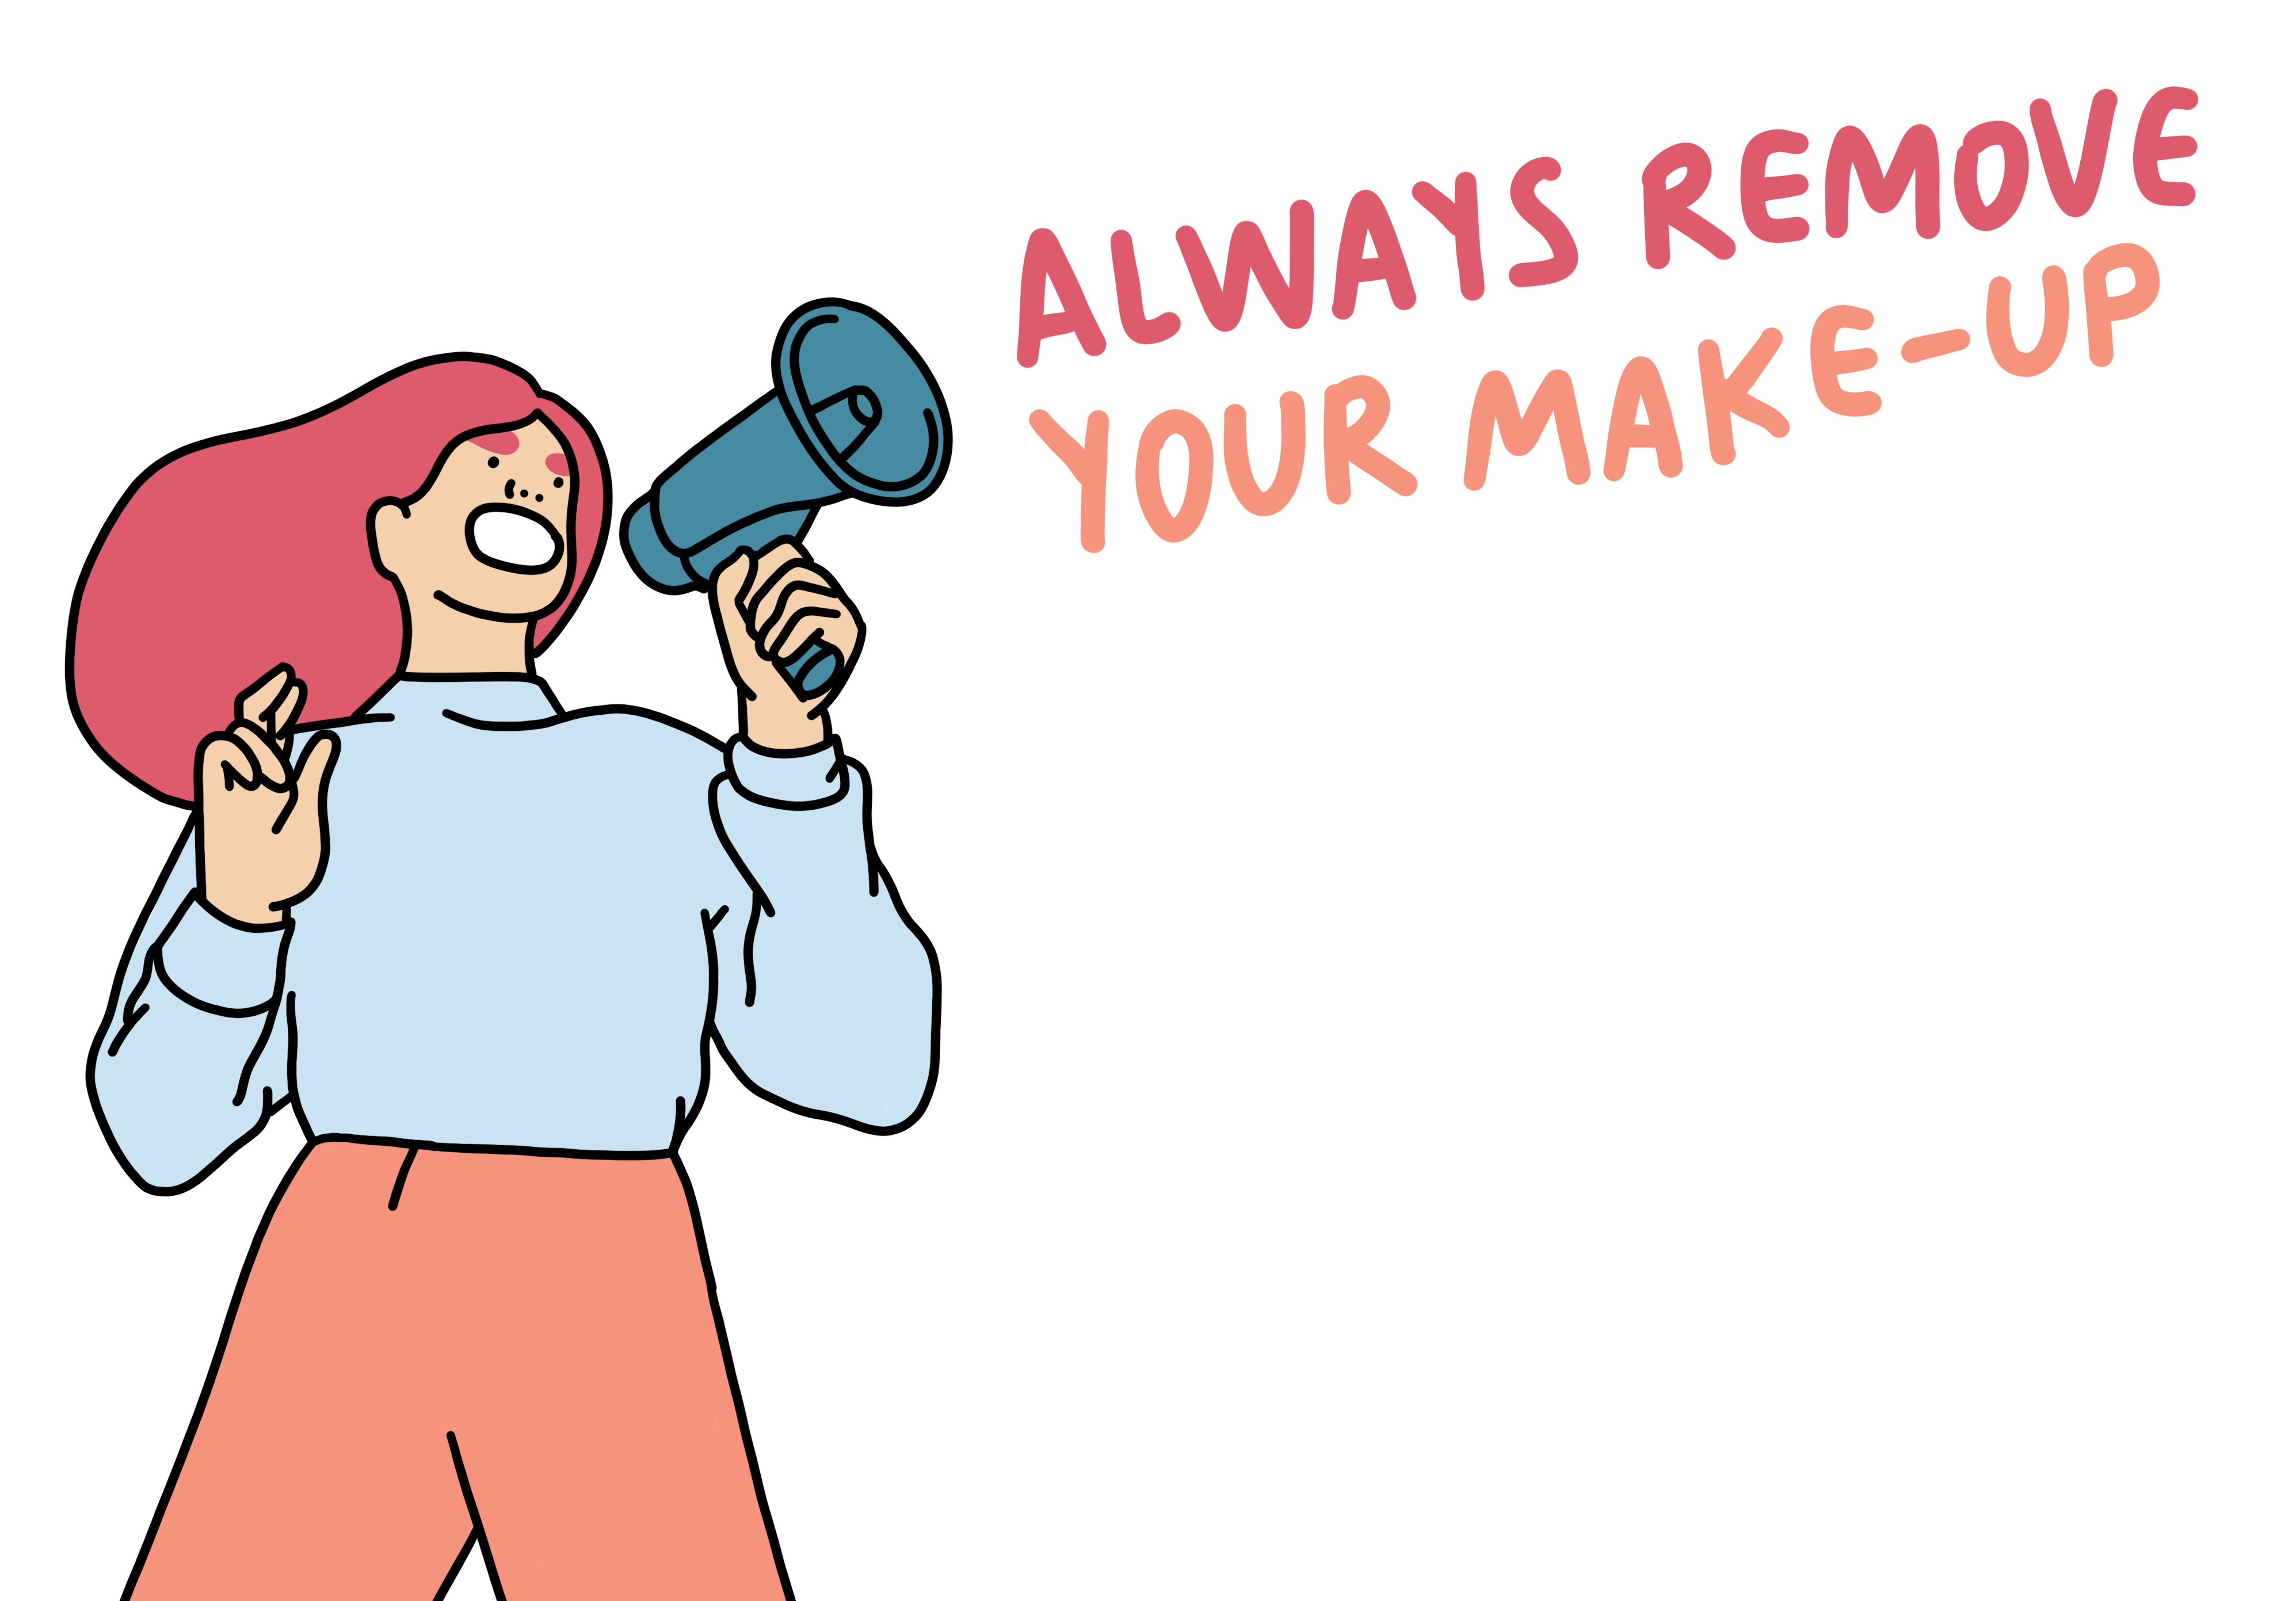 Always remove your make-up